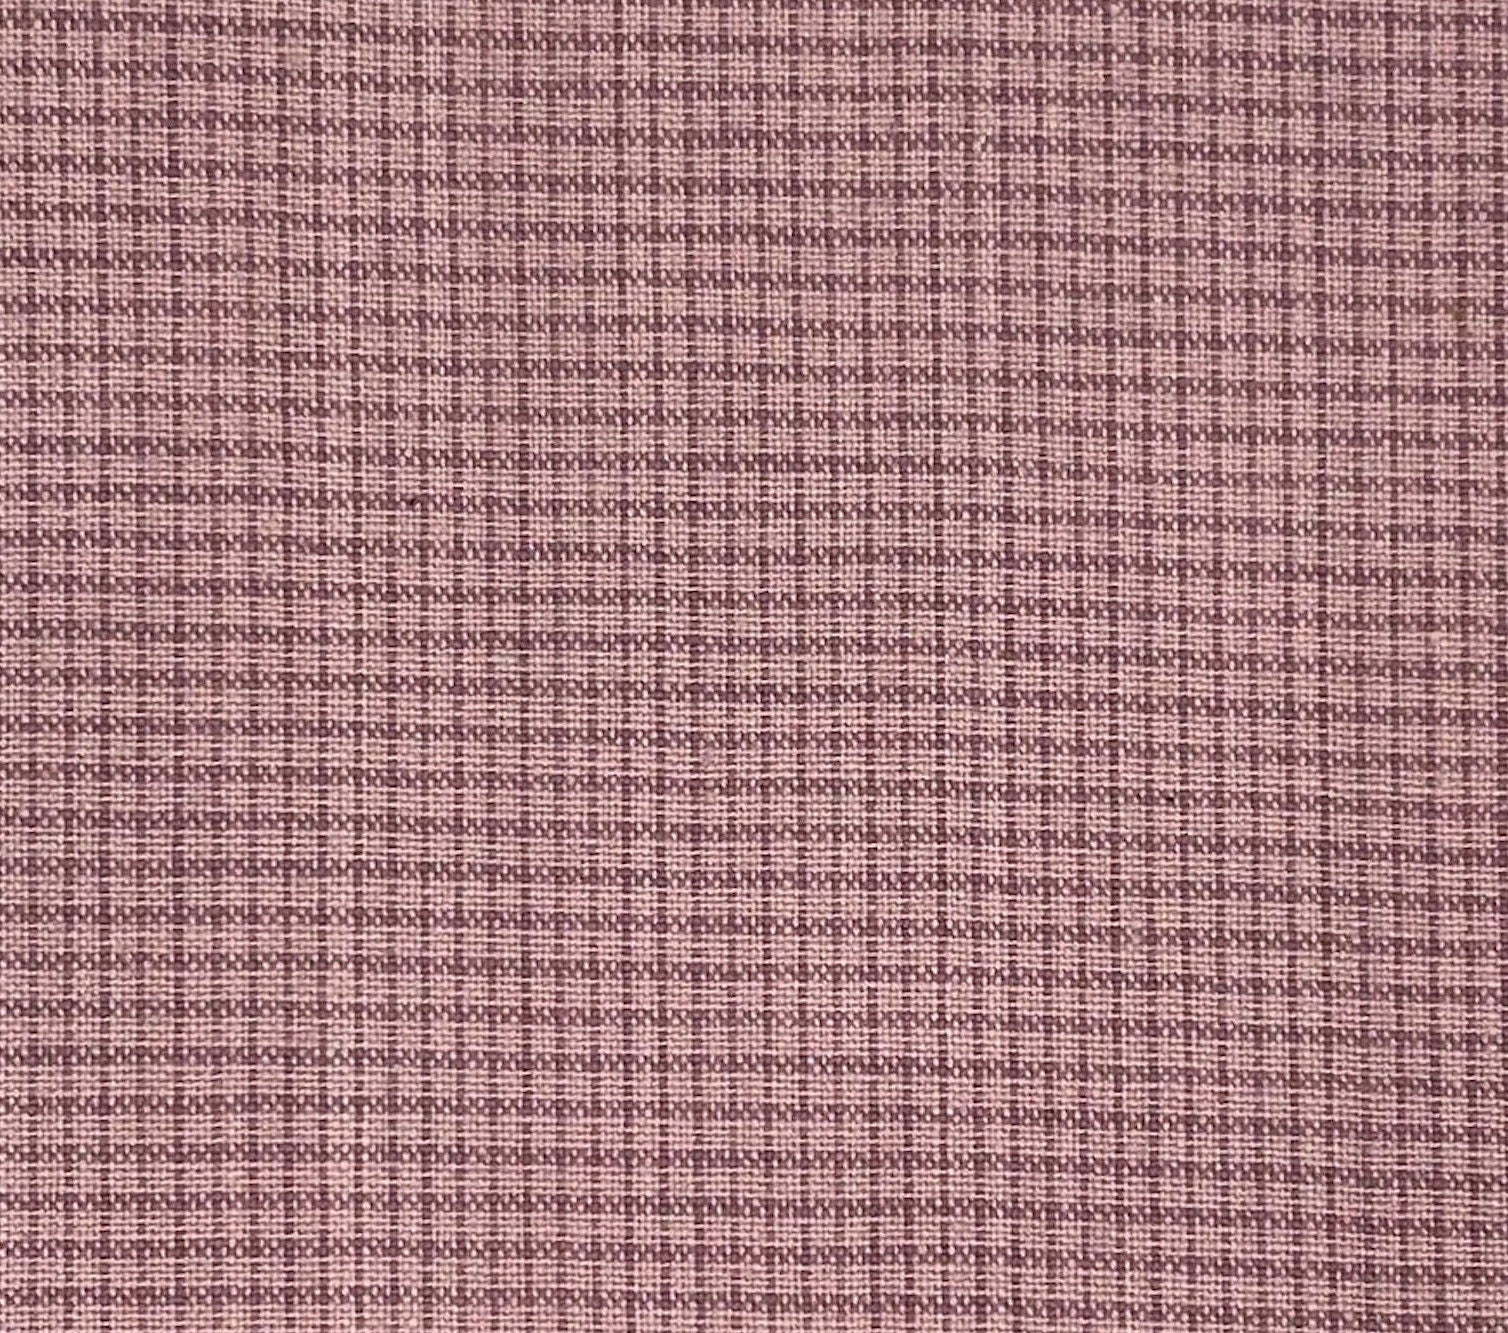 Manchester - Check - Lavender on Lilac - homesewn